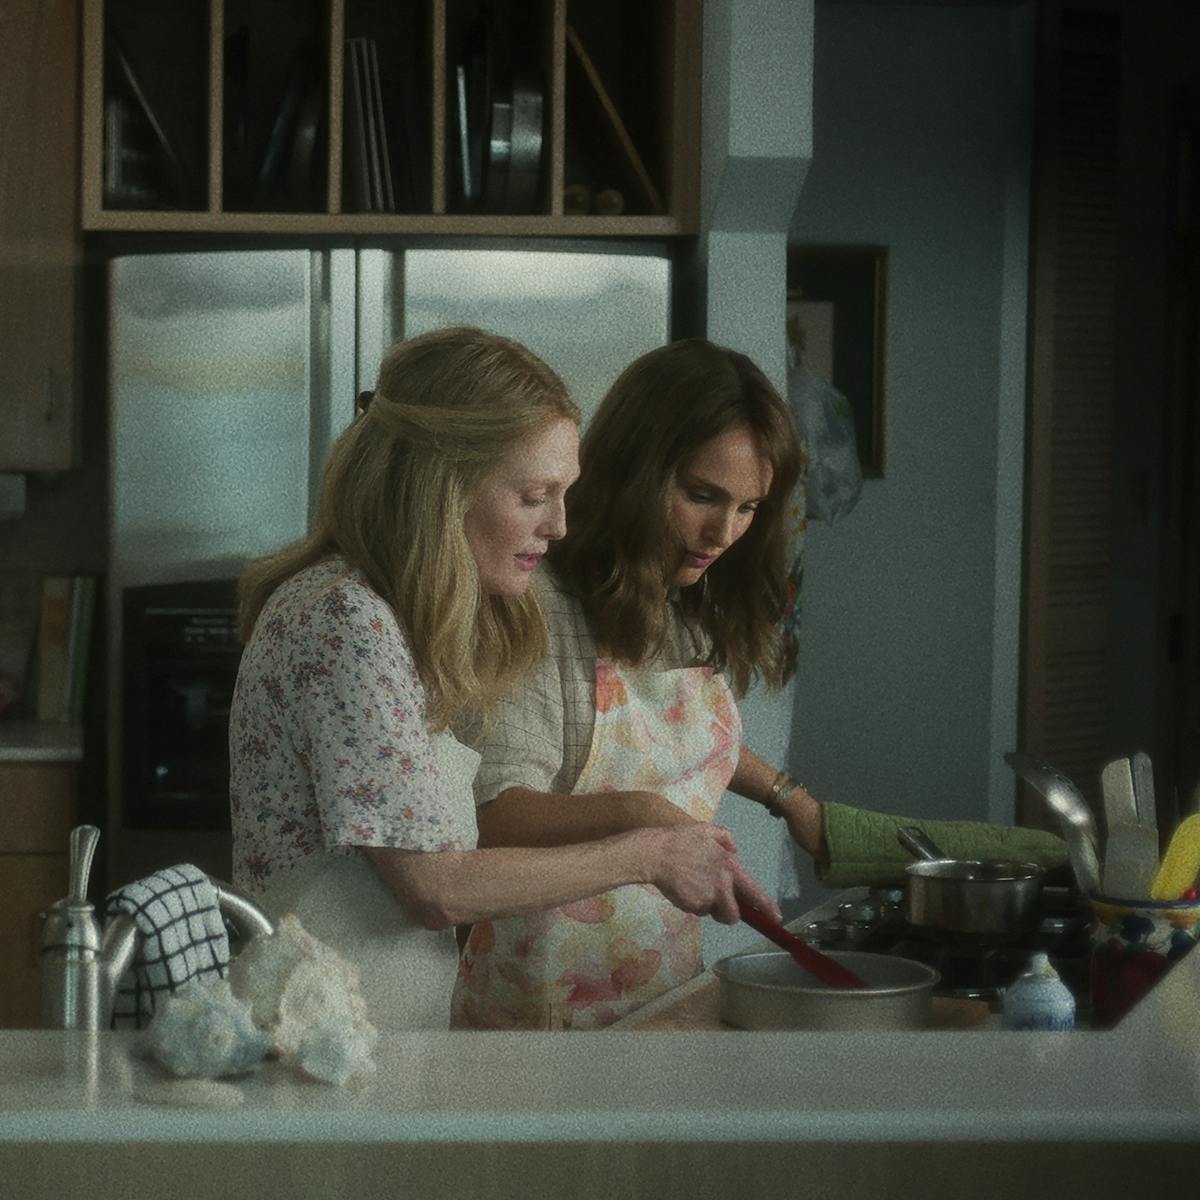 Gracie Atherton-Yoo (Julianne Moore) shows Elizabeth Berry (Natalie Portman) how to bake a cake. Both women wear floral and aprons.